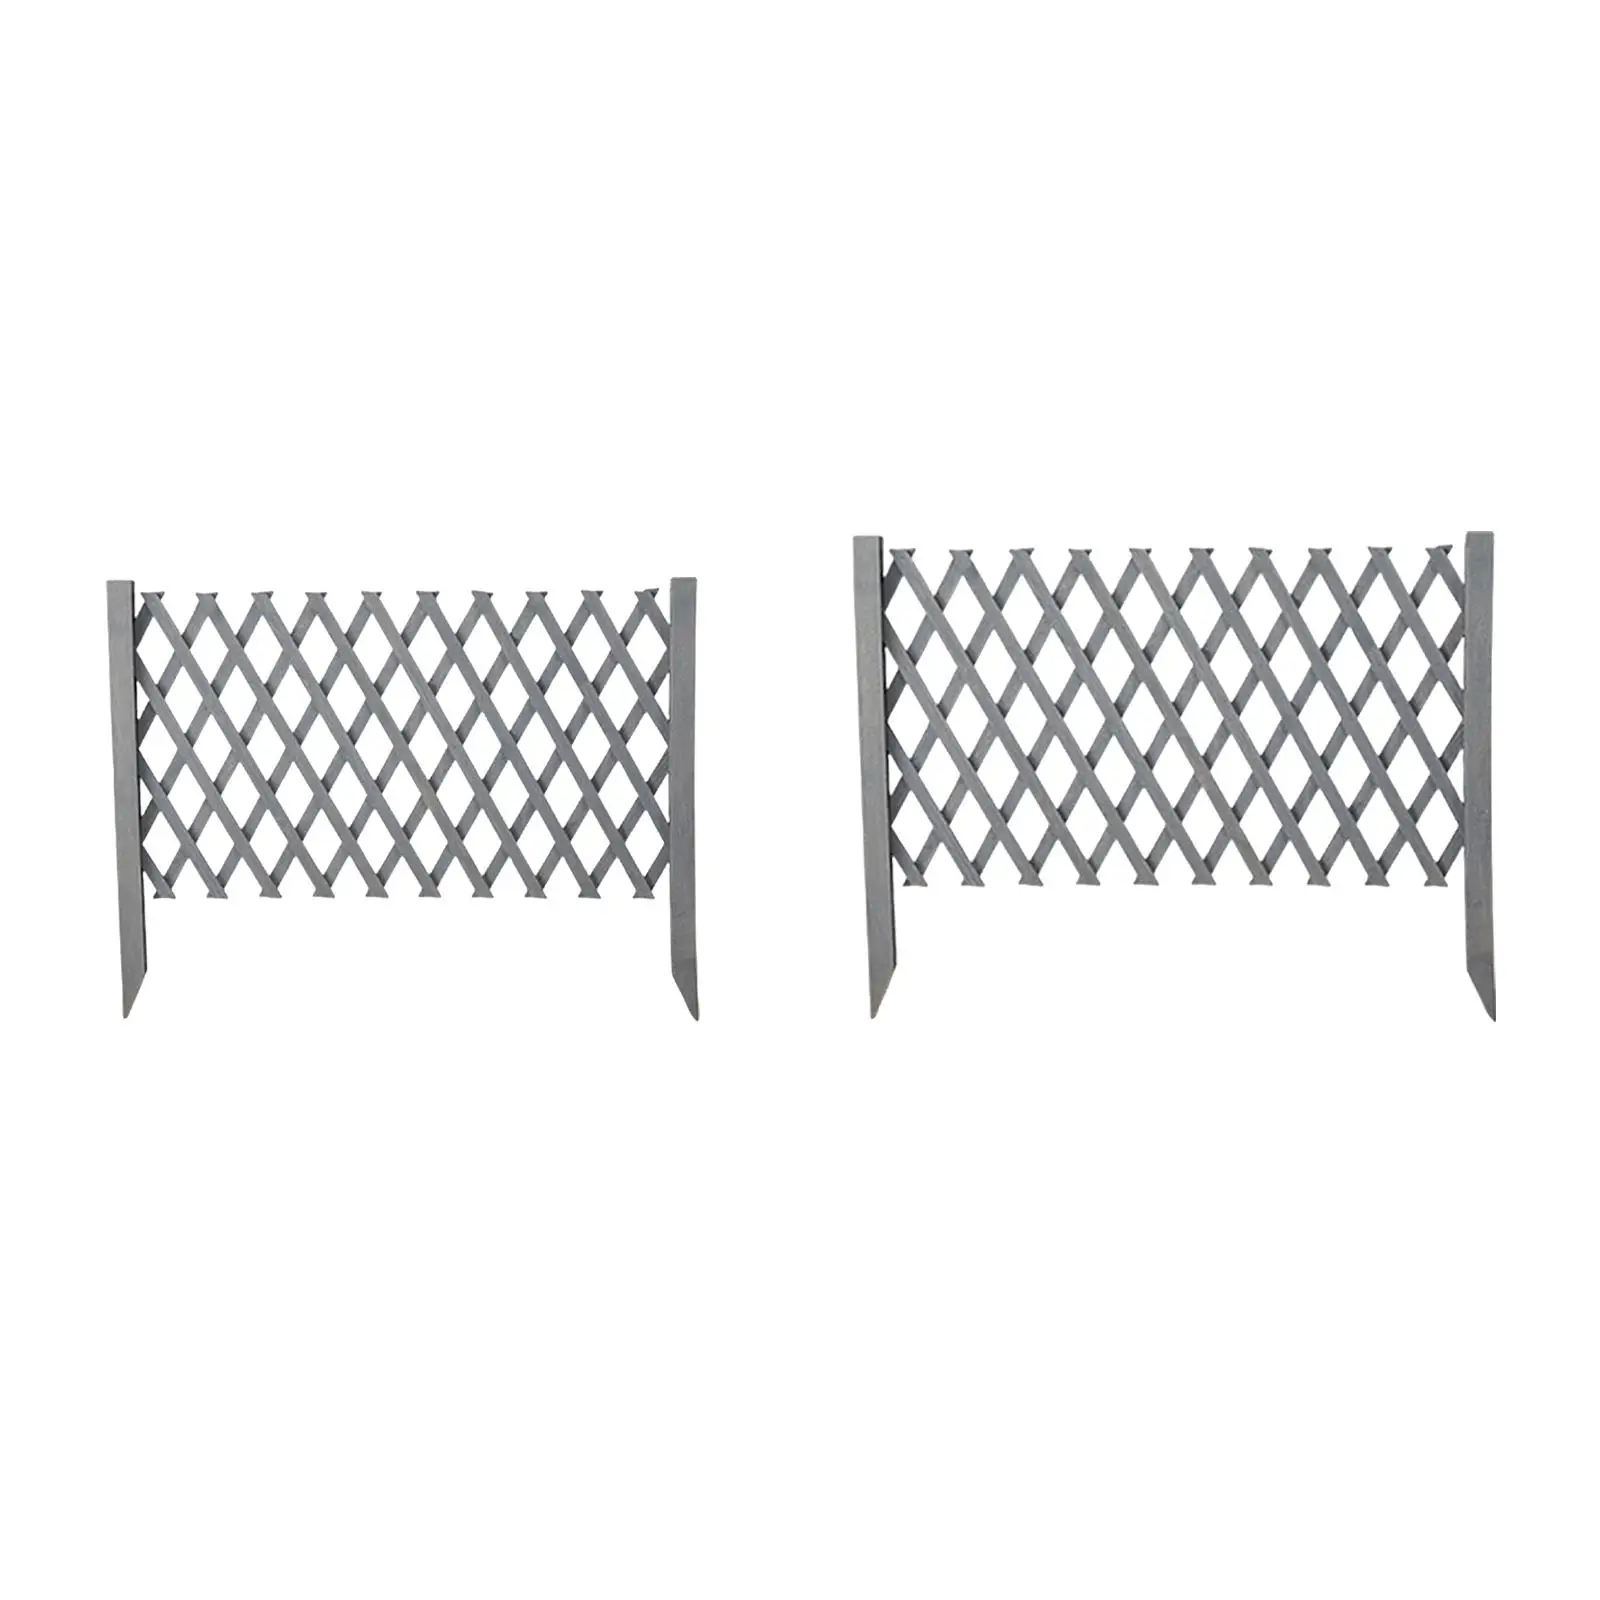 Garden Trellis Fence Indoor Outdoor Pet Gates Wood Fence Partition Expanding Expandable Wooden Fence for Wedding Prop Backyard